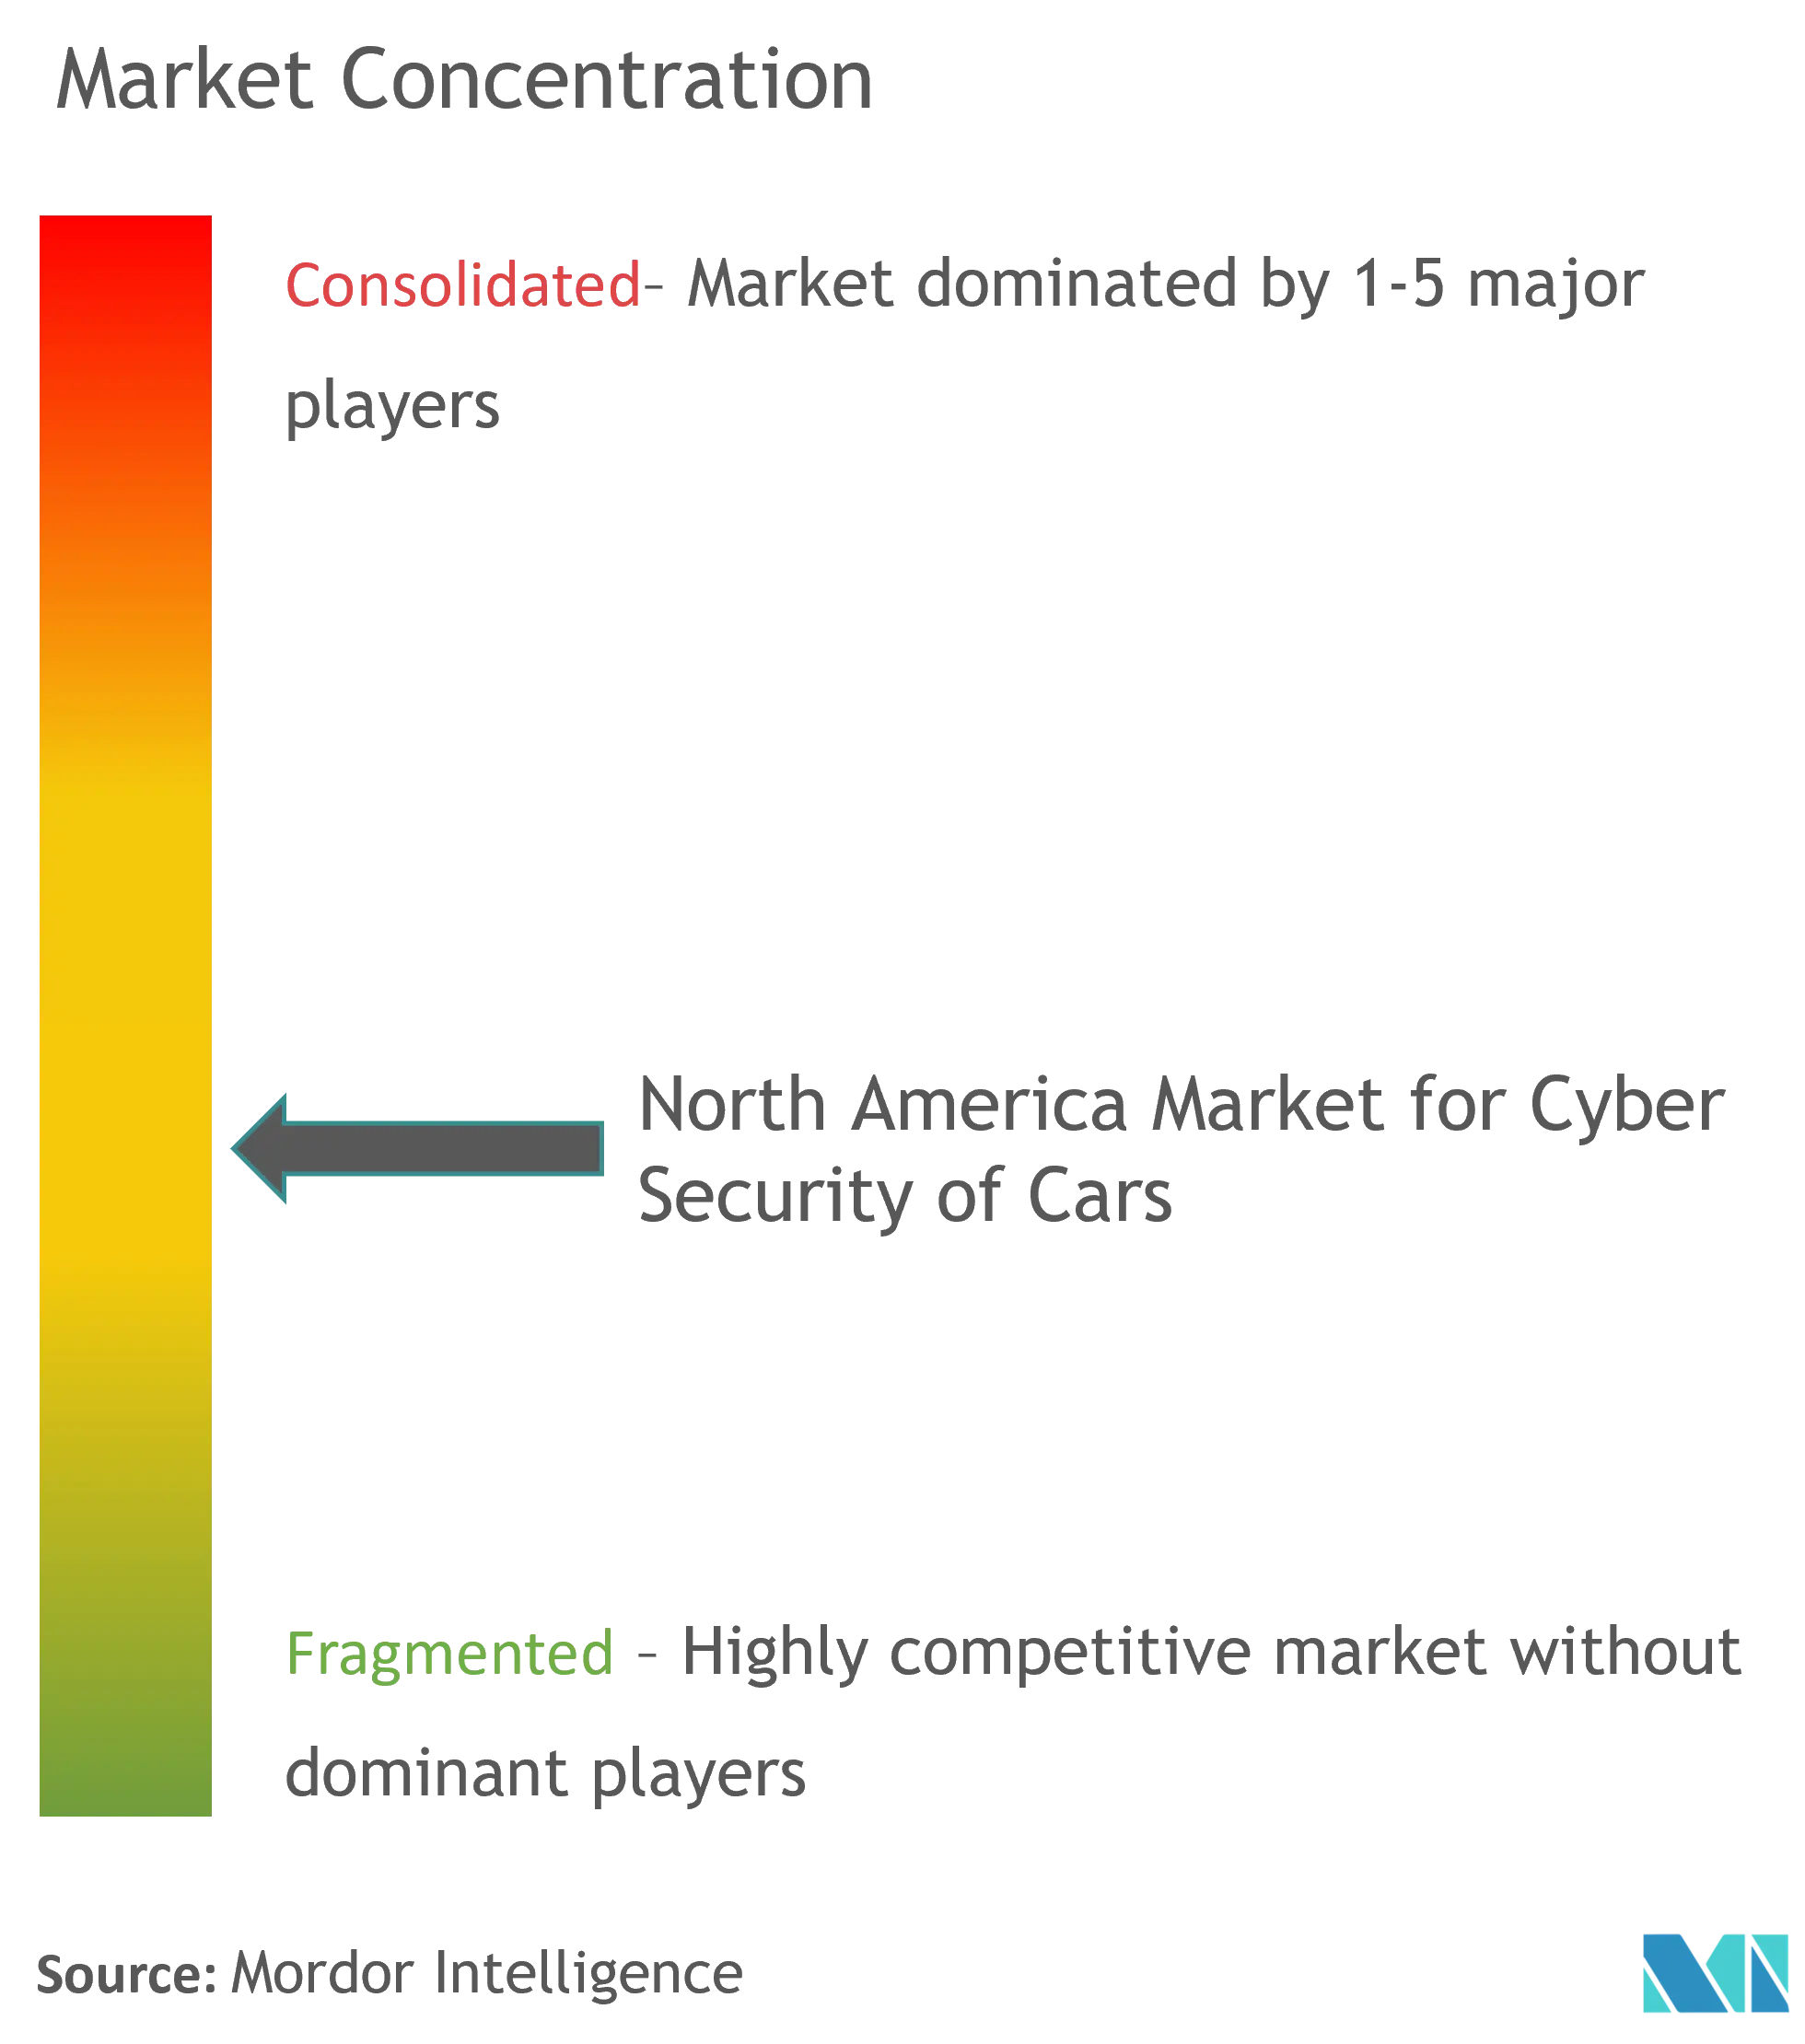 North America Market for Cyber Security of Cars